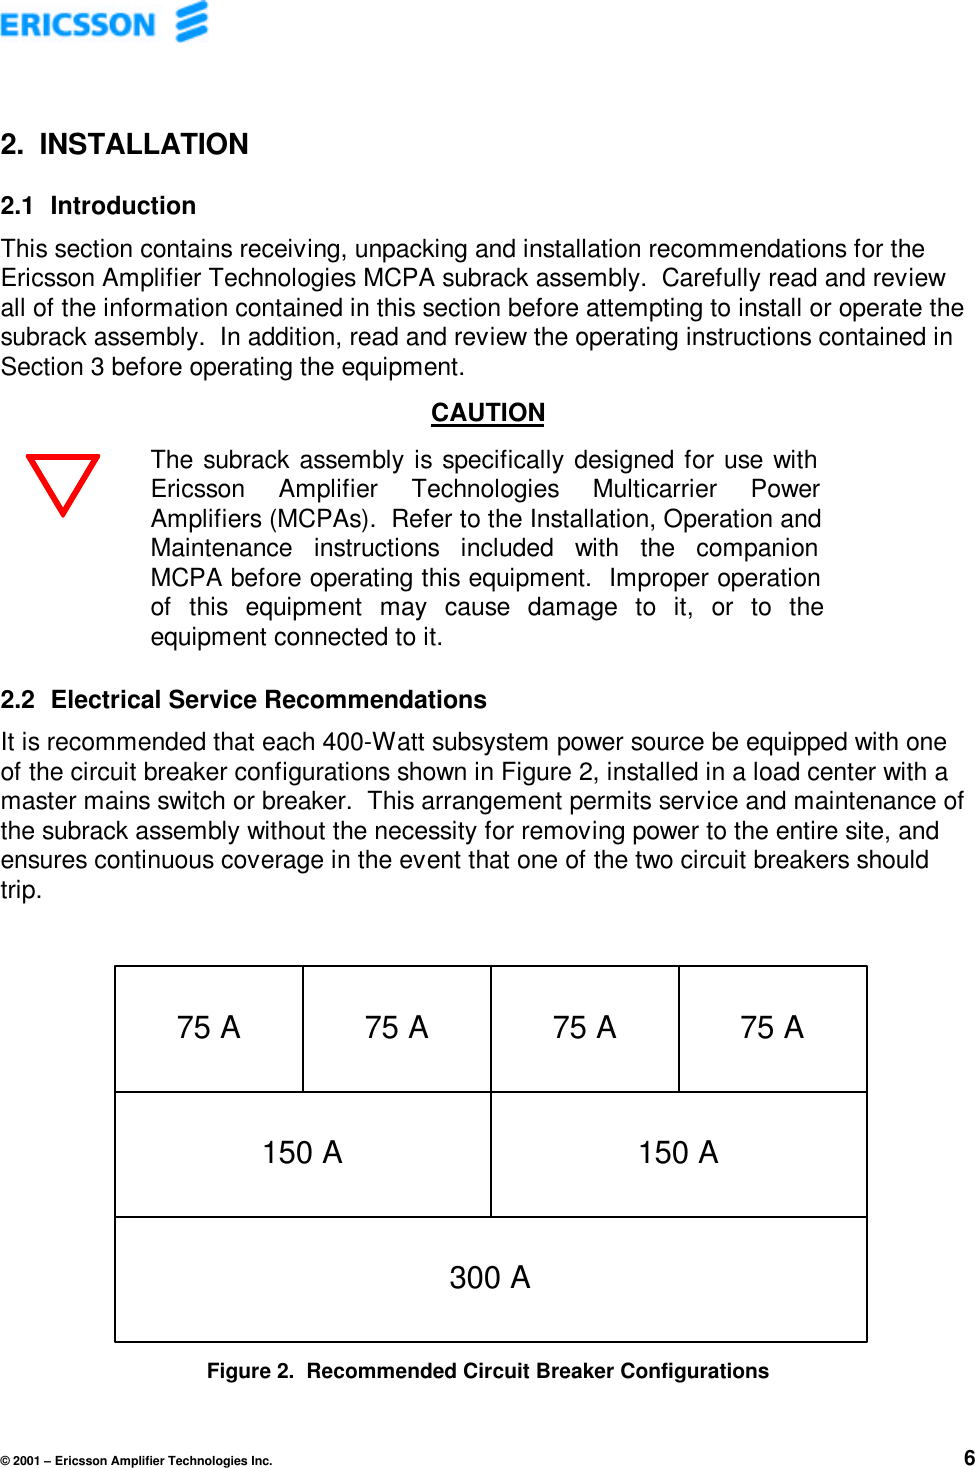 © 2001 – Ericsson Amplifier Technologies Inc. 62. INSTALLATION2.1  IntroductionThis section contains receiving, unpacking and installation recommendations for theEricsson Amplifier Technologies MCPA subrack assembly.  Carefully read and reviewall of the information contained in this section before attempting to install or operate thesubrack assembly.  In addition, read and review the operating instructions contained inSection 3 before operating the equipment.CAUTIONThe subrack assembly is specifically designed for use withEricsson Amplifier Technologies Multicarrier PowerAmplifiers (MCPAs).  Refer to the Installation, Operation andMaintenance instructions included with the companionMCPA before operating this equipment.  Improper operationof this equipment may cause damage to it, or to theequipment connected to it.2.2  Electrical Service RecommendationsIt is recommended that each 400-Watt subsystem power source be equipped with oneof the circuit breaker configurations shown in Figure 2, installed in a load center with amaster mains switch or breaker.  This arrangement permits service and maintenance ofthe subrack assembly without the necessity for removing power to the entire site, andensures continuous coverage in the event that one of the two circuit breakers shouldtrip.Figure 2.  Recommended Circuit Breaker Configurations75 A 75 A 75 A 75 A150 A300 A150 A